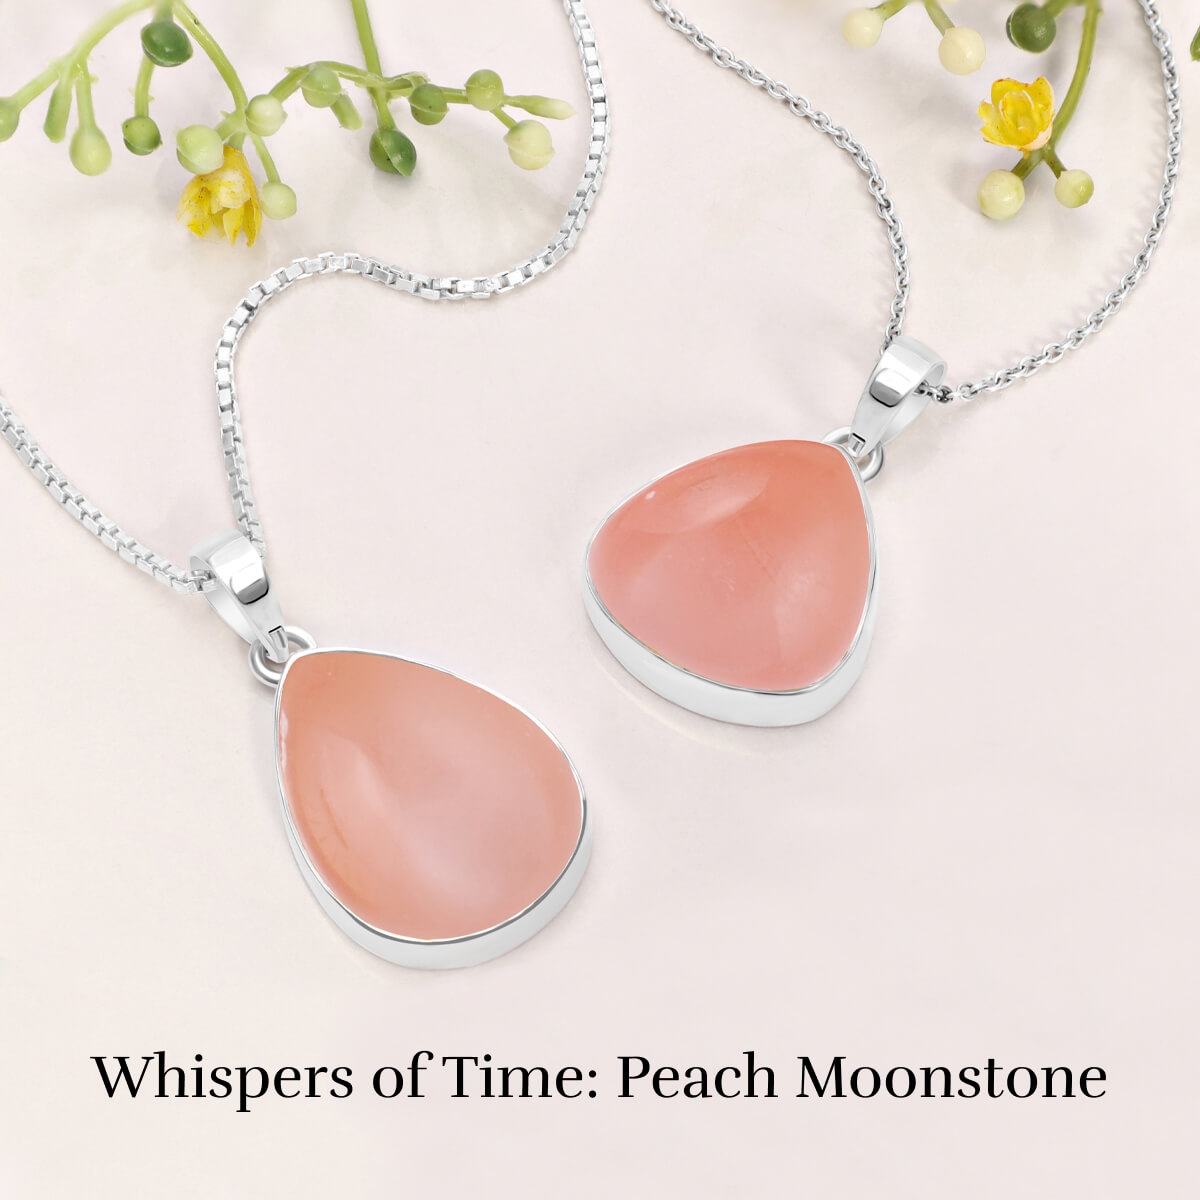 Here are some interesting facts about peach moonstone history: